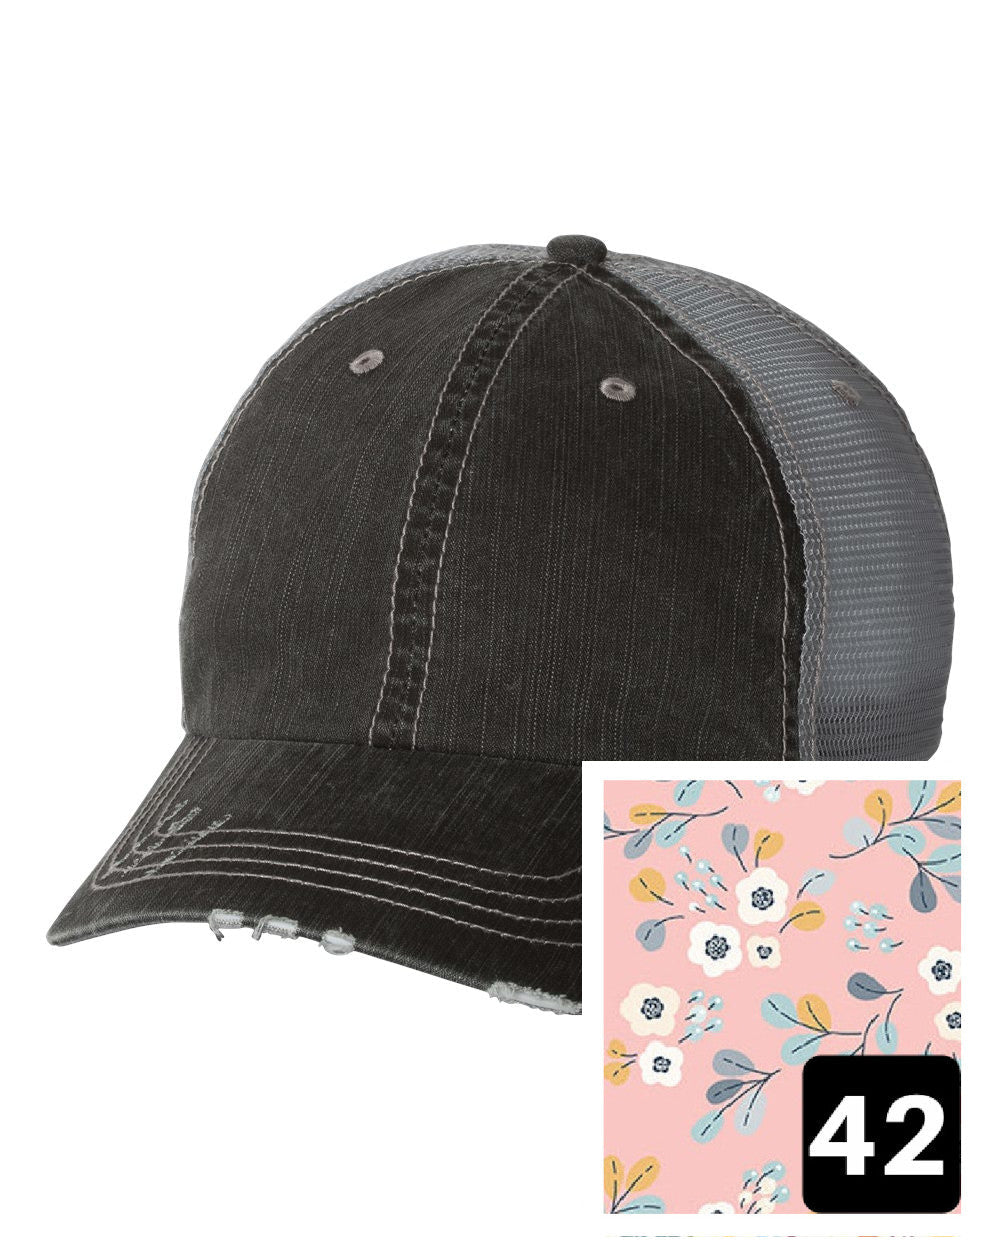 gray distressed trucker hat with light blue and pink mosaic fabric state of New Jersey